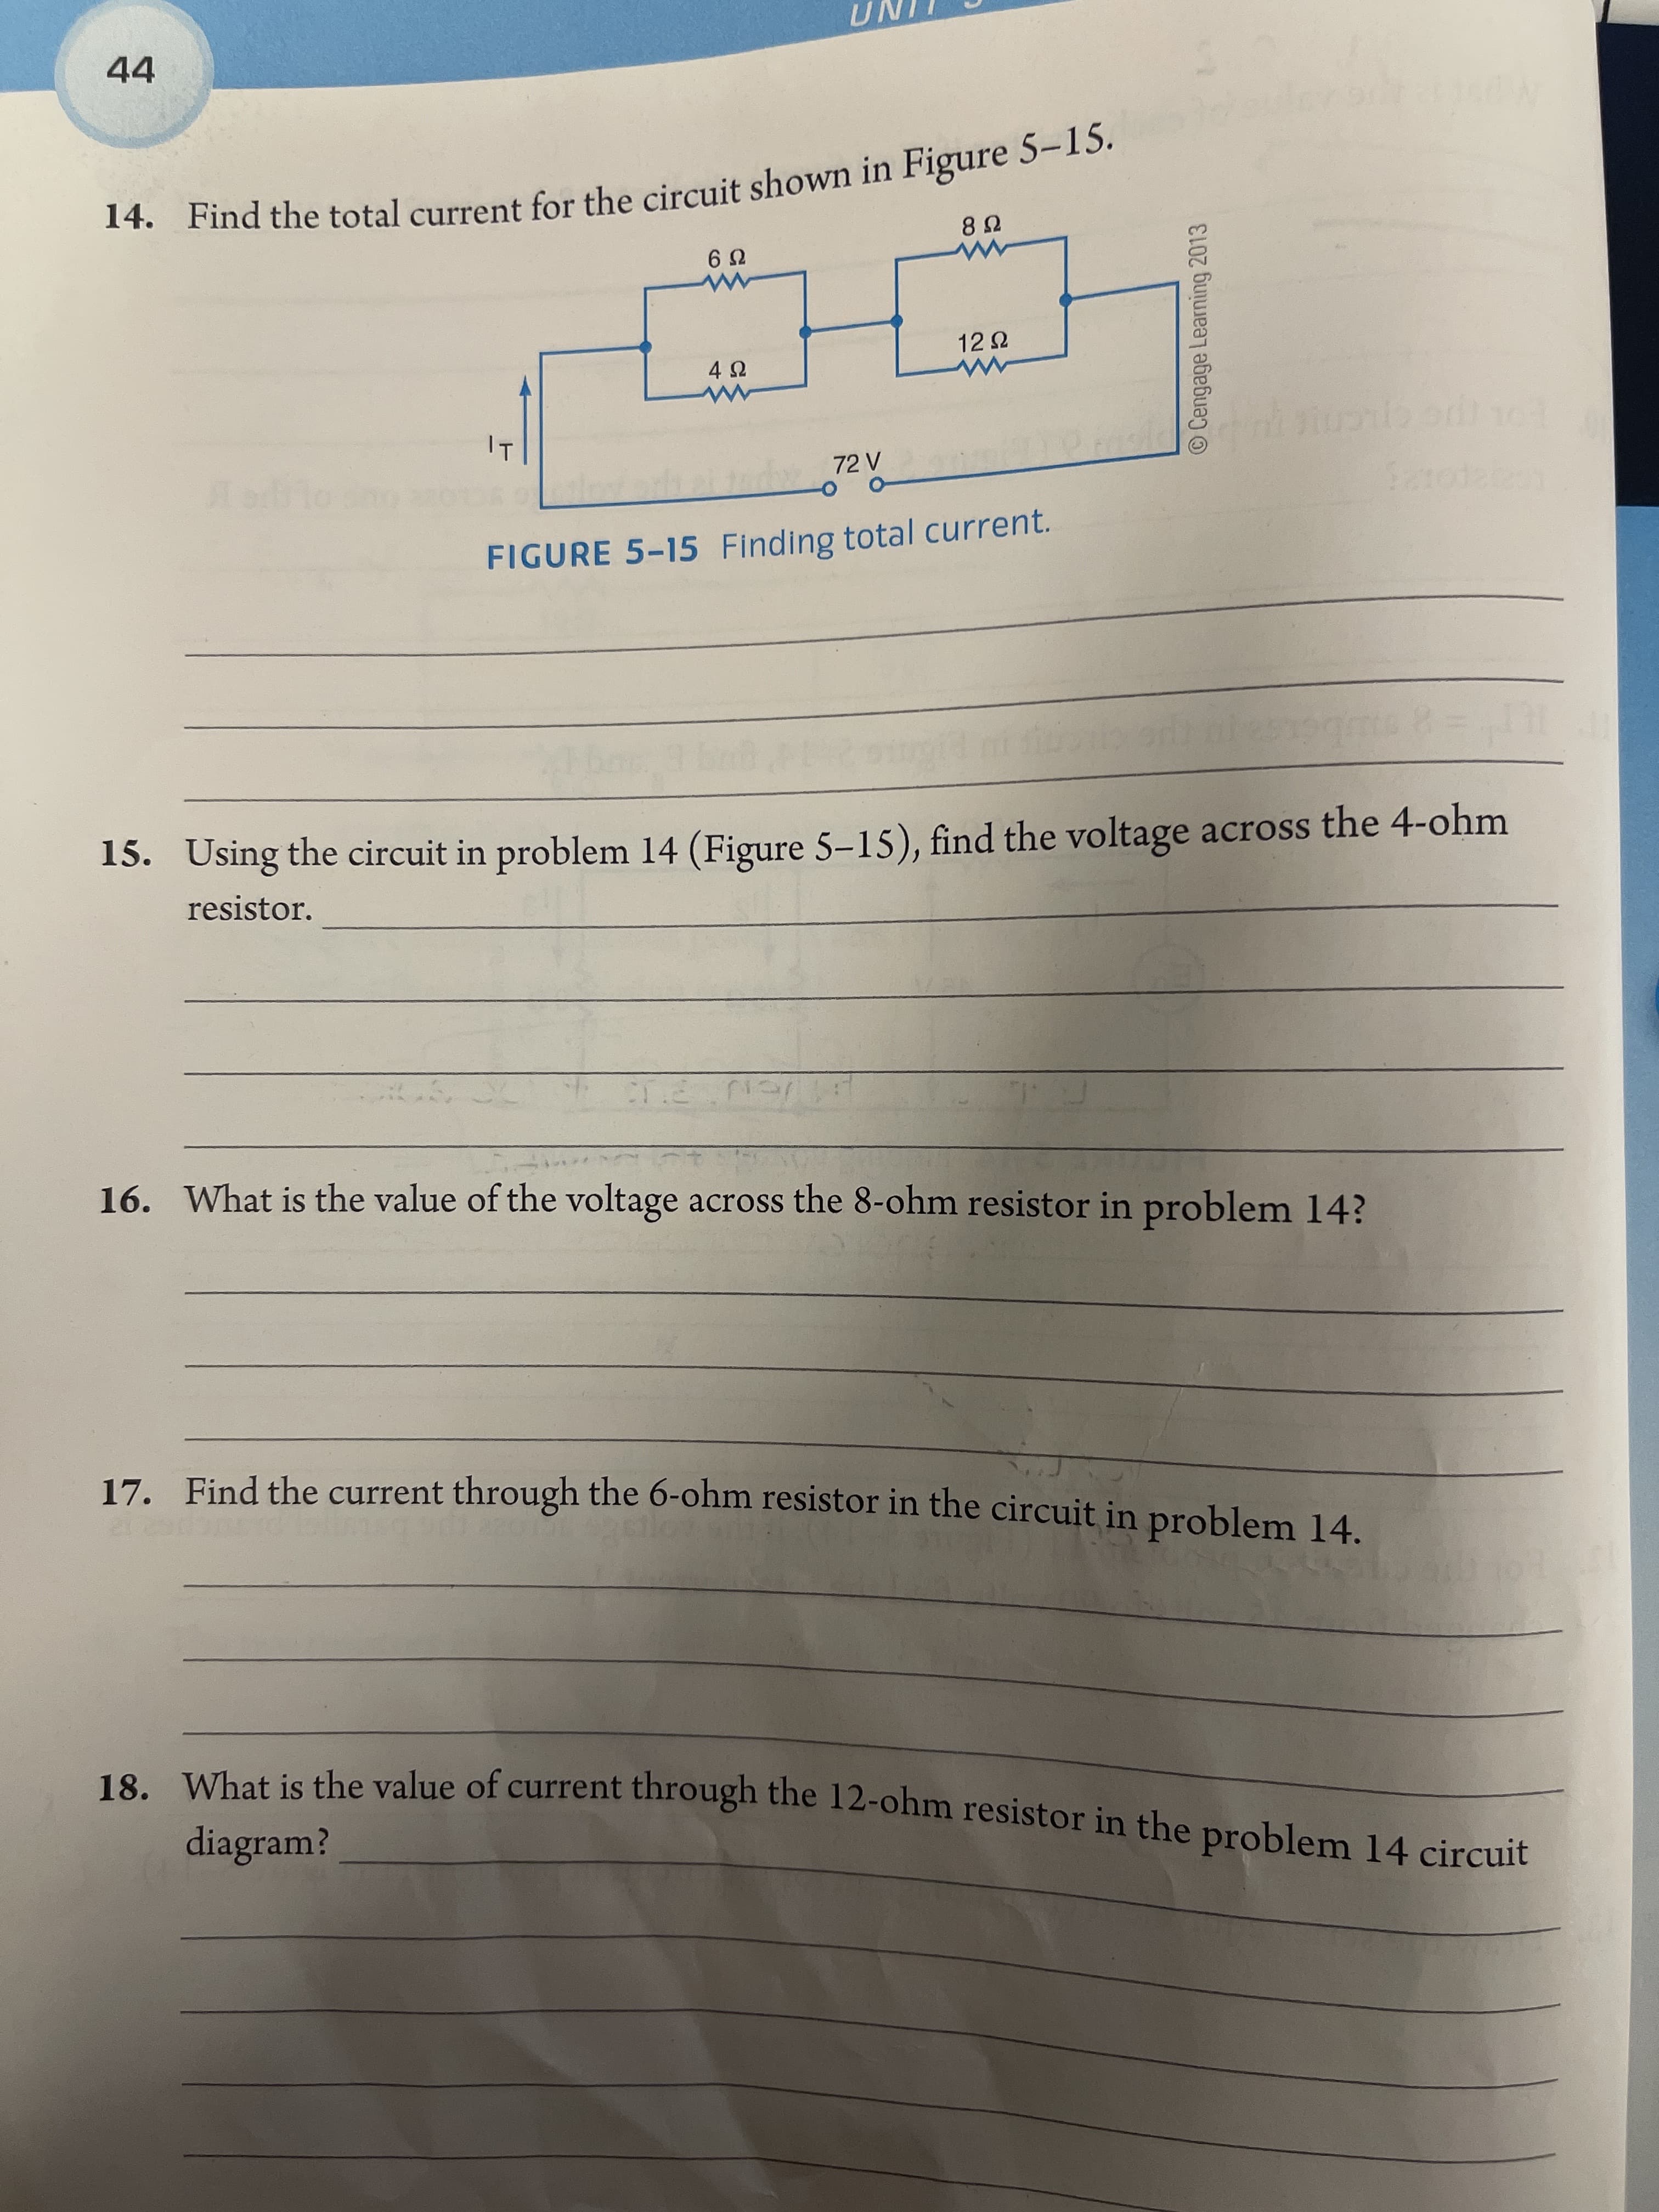 O Cengage Learning 2013
14. Find the total for the in 5-15.
44
14. Find the total current for the circuit shown in Figure 5-1S.
72 V
FIGURE 5-15 Finding total current.
15. Using the circuit in problem 14 (Figure 5-15), find the voltage across the 4-ohm
resistor.
16. What is the value of the voltage across the 8-ohm resistor in problem 14?
17. Find the current through the 6-ohm resistor in the circuit in problem 14.
18 What is the value of current through the 12-ohm resistor in the problem 14 circuit
diagram?
